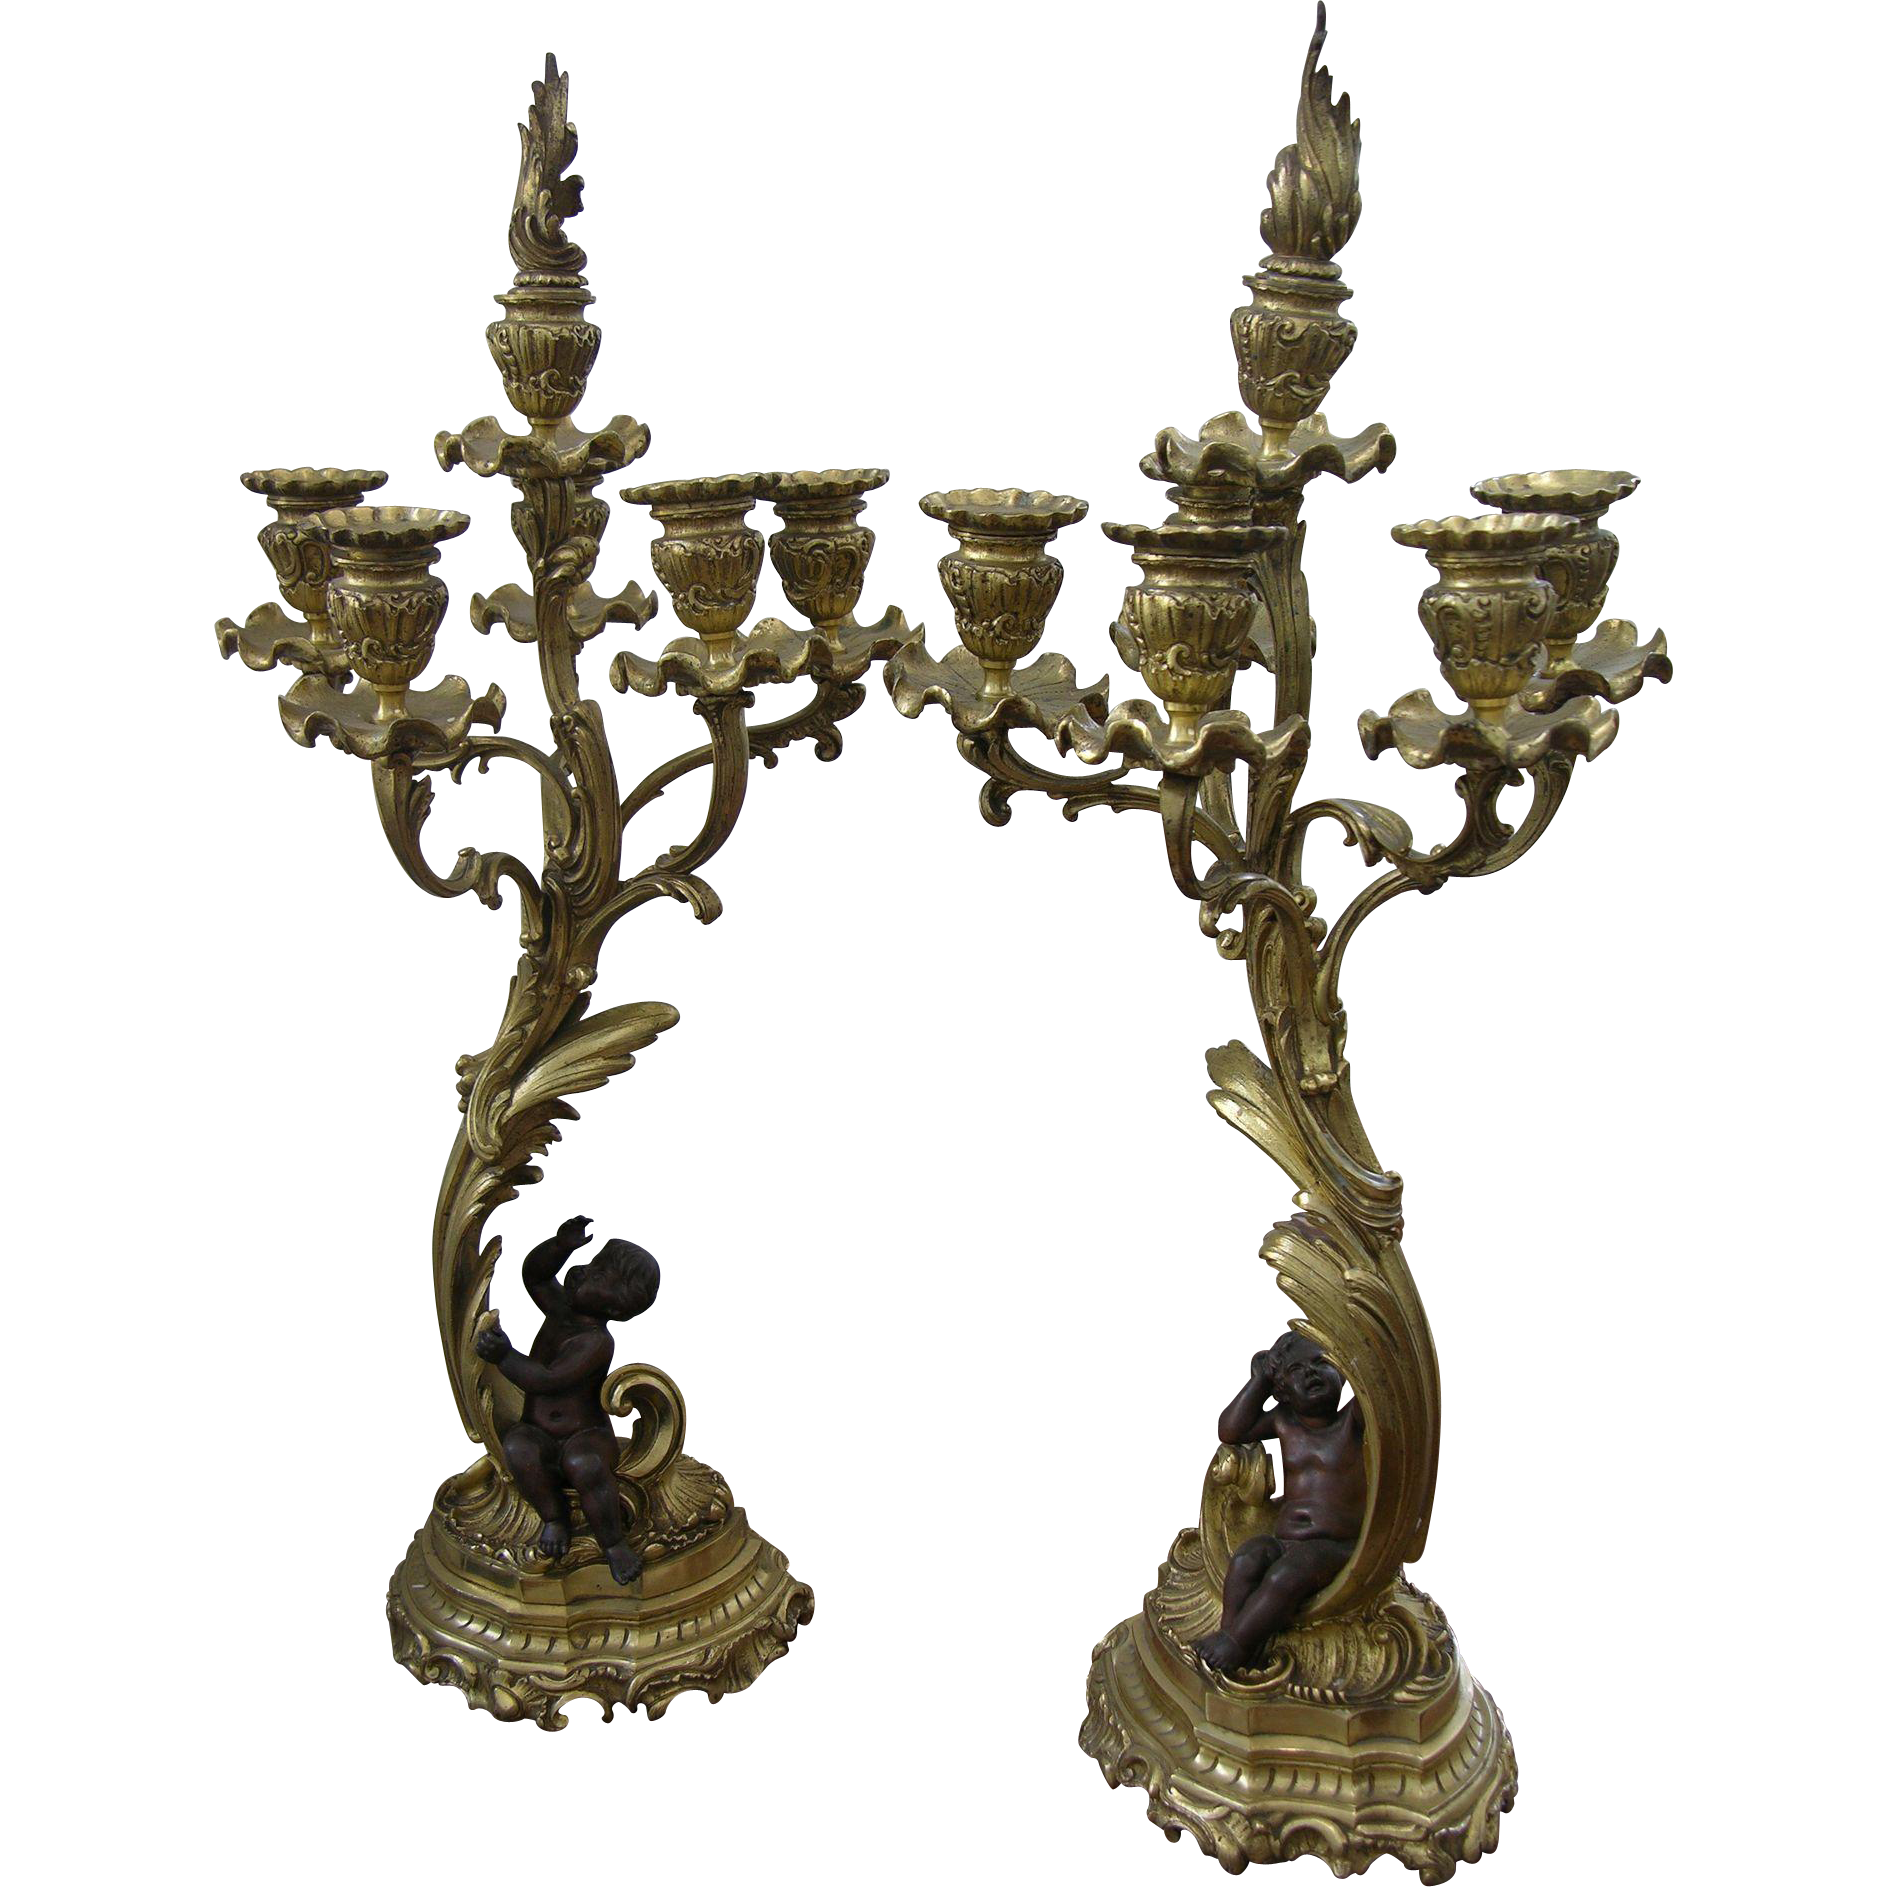 1870s Antique French Pair of Napoleon III Bronze and Ormolu Candelabra - Cosulich Interiors & Antiques